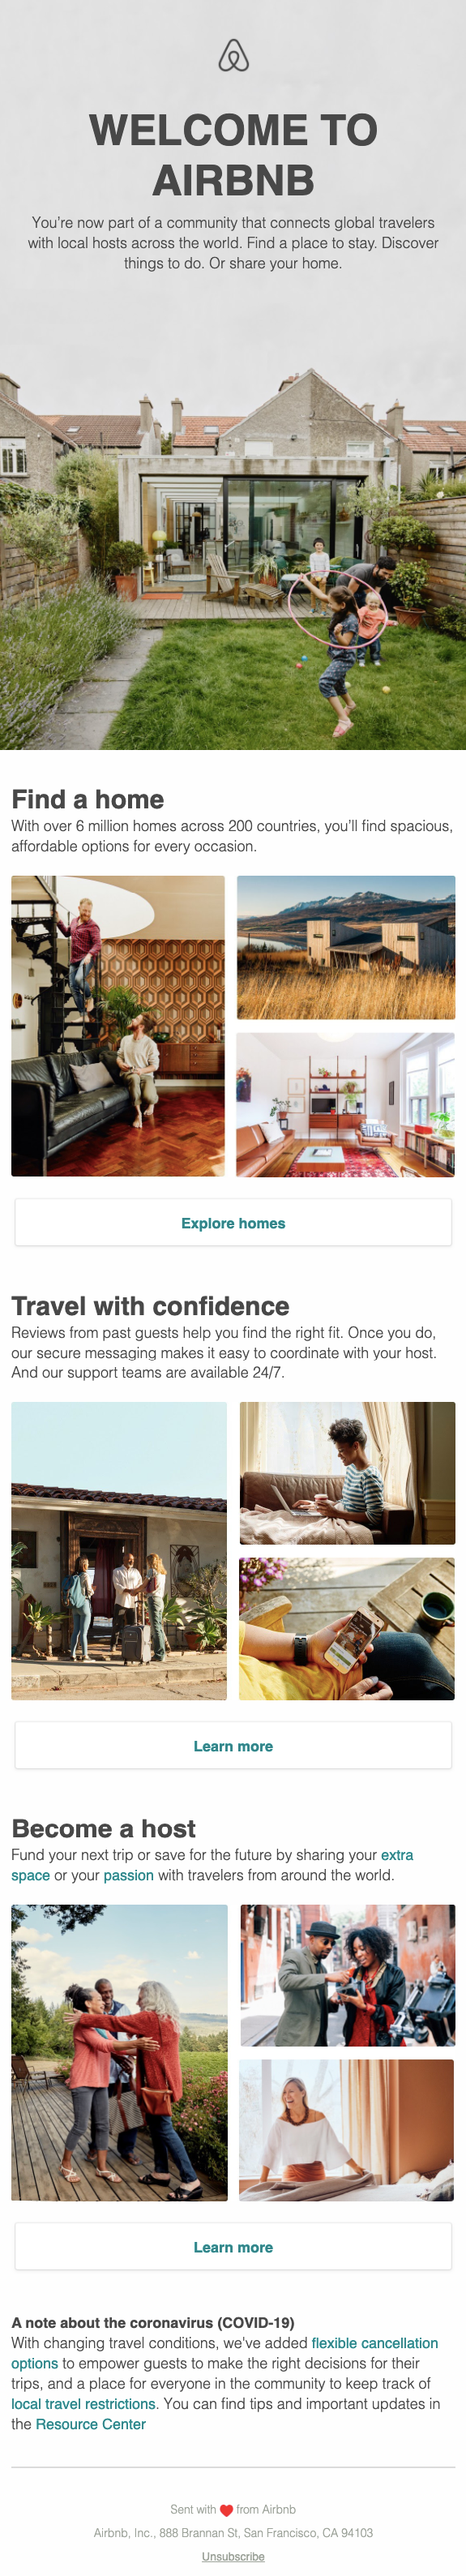 Airbnb's Welcome email